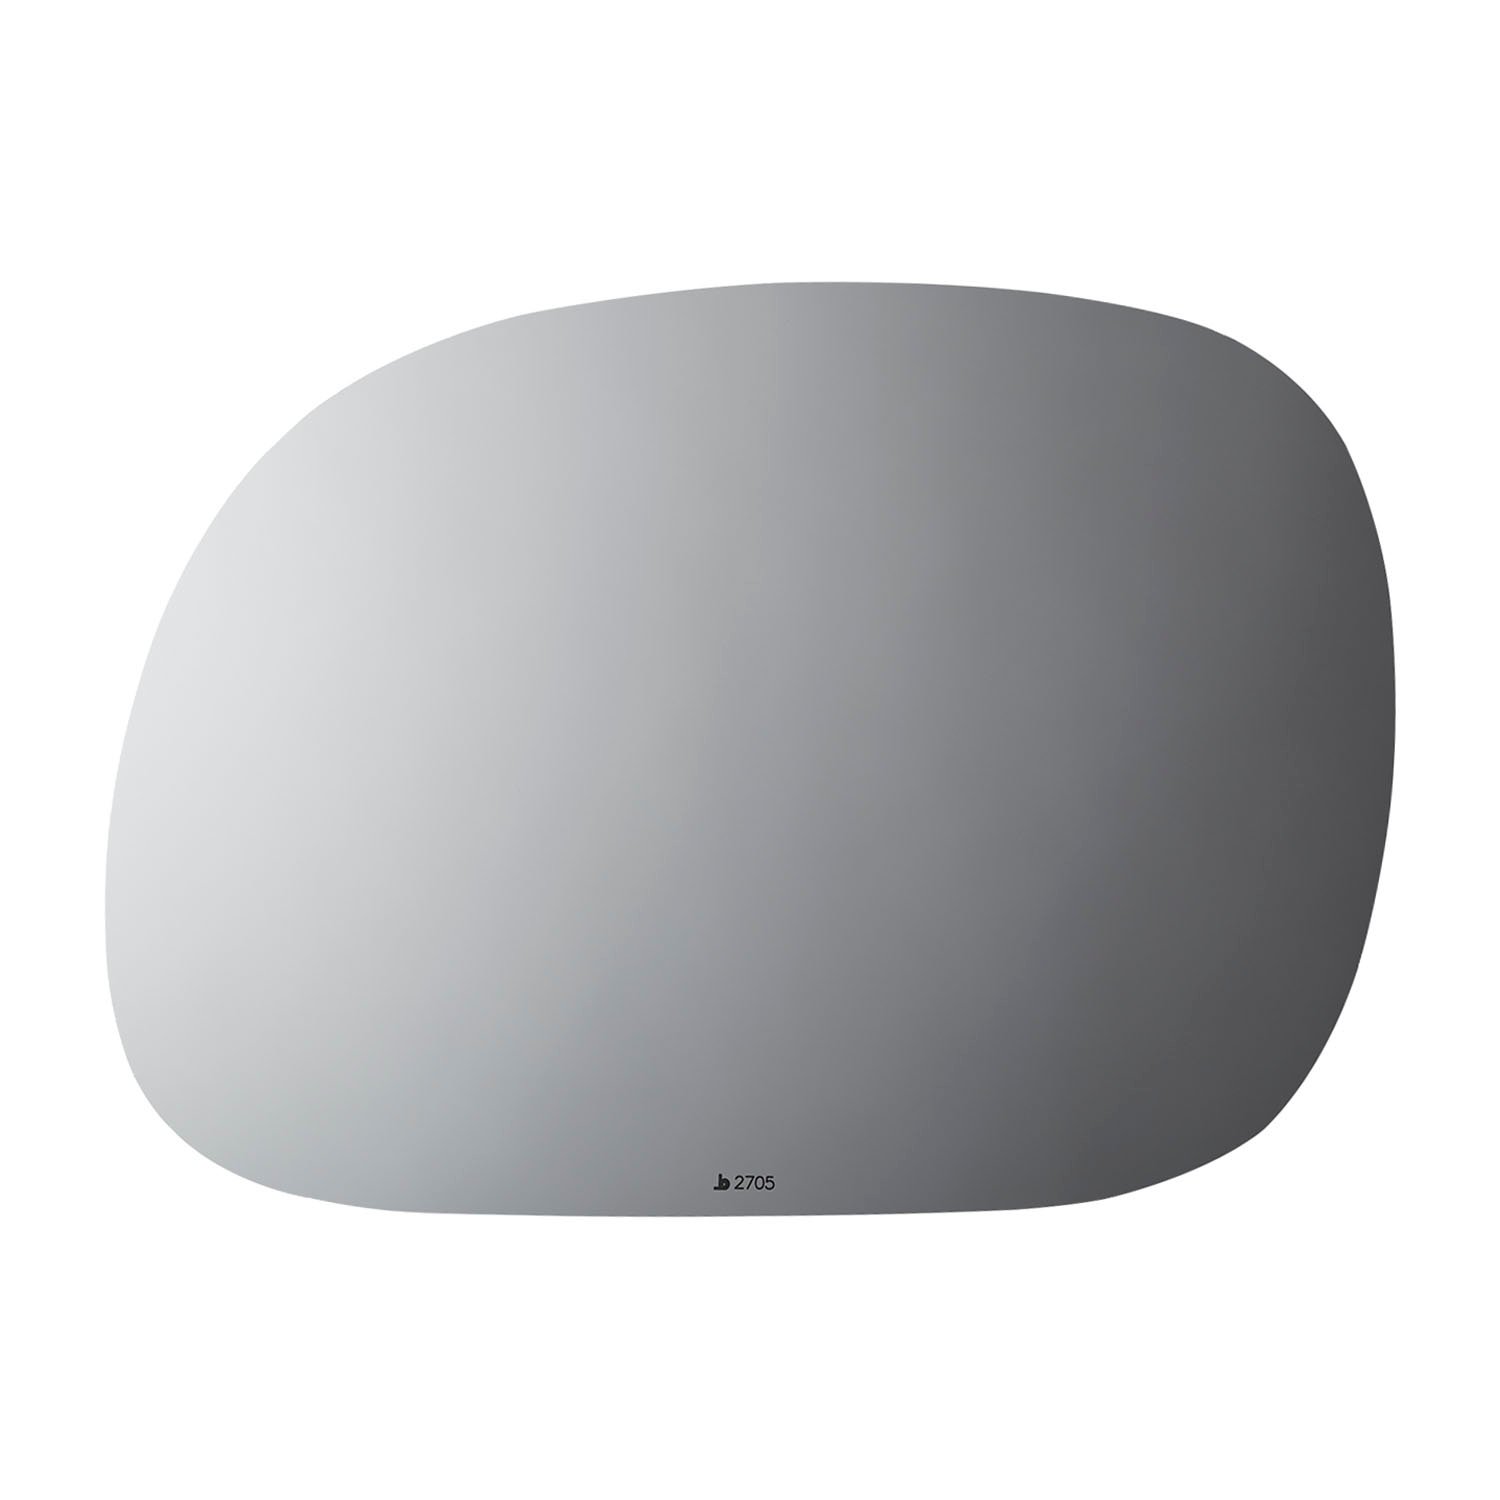 2705 SIDE VIEW MIRROR